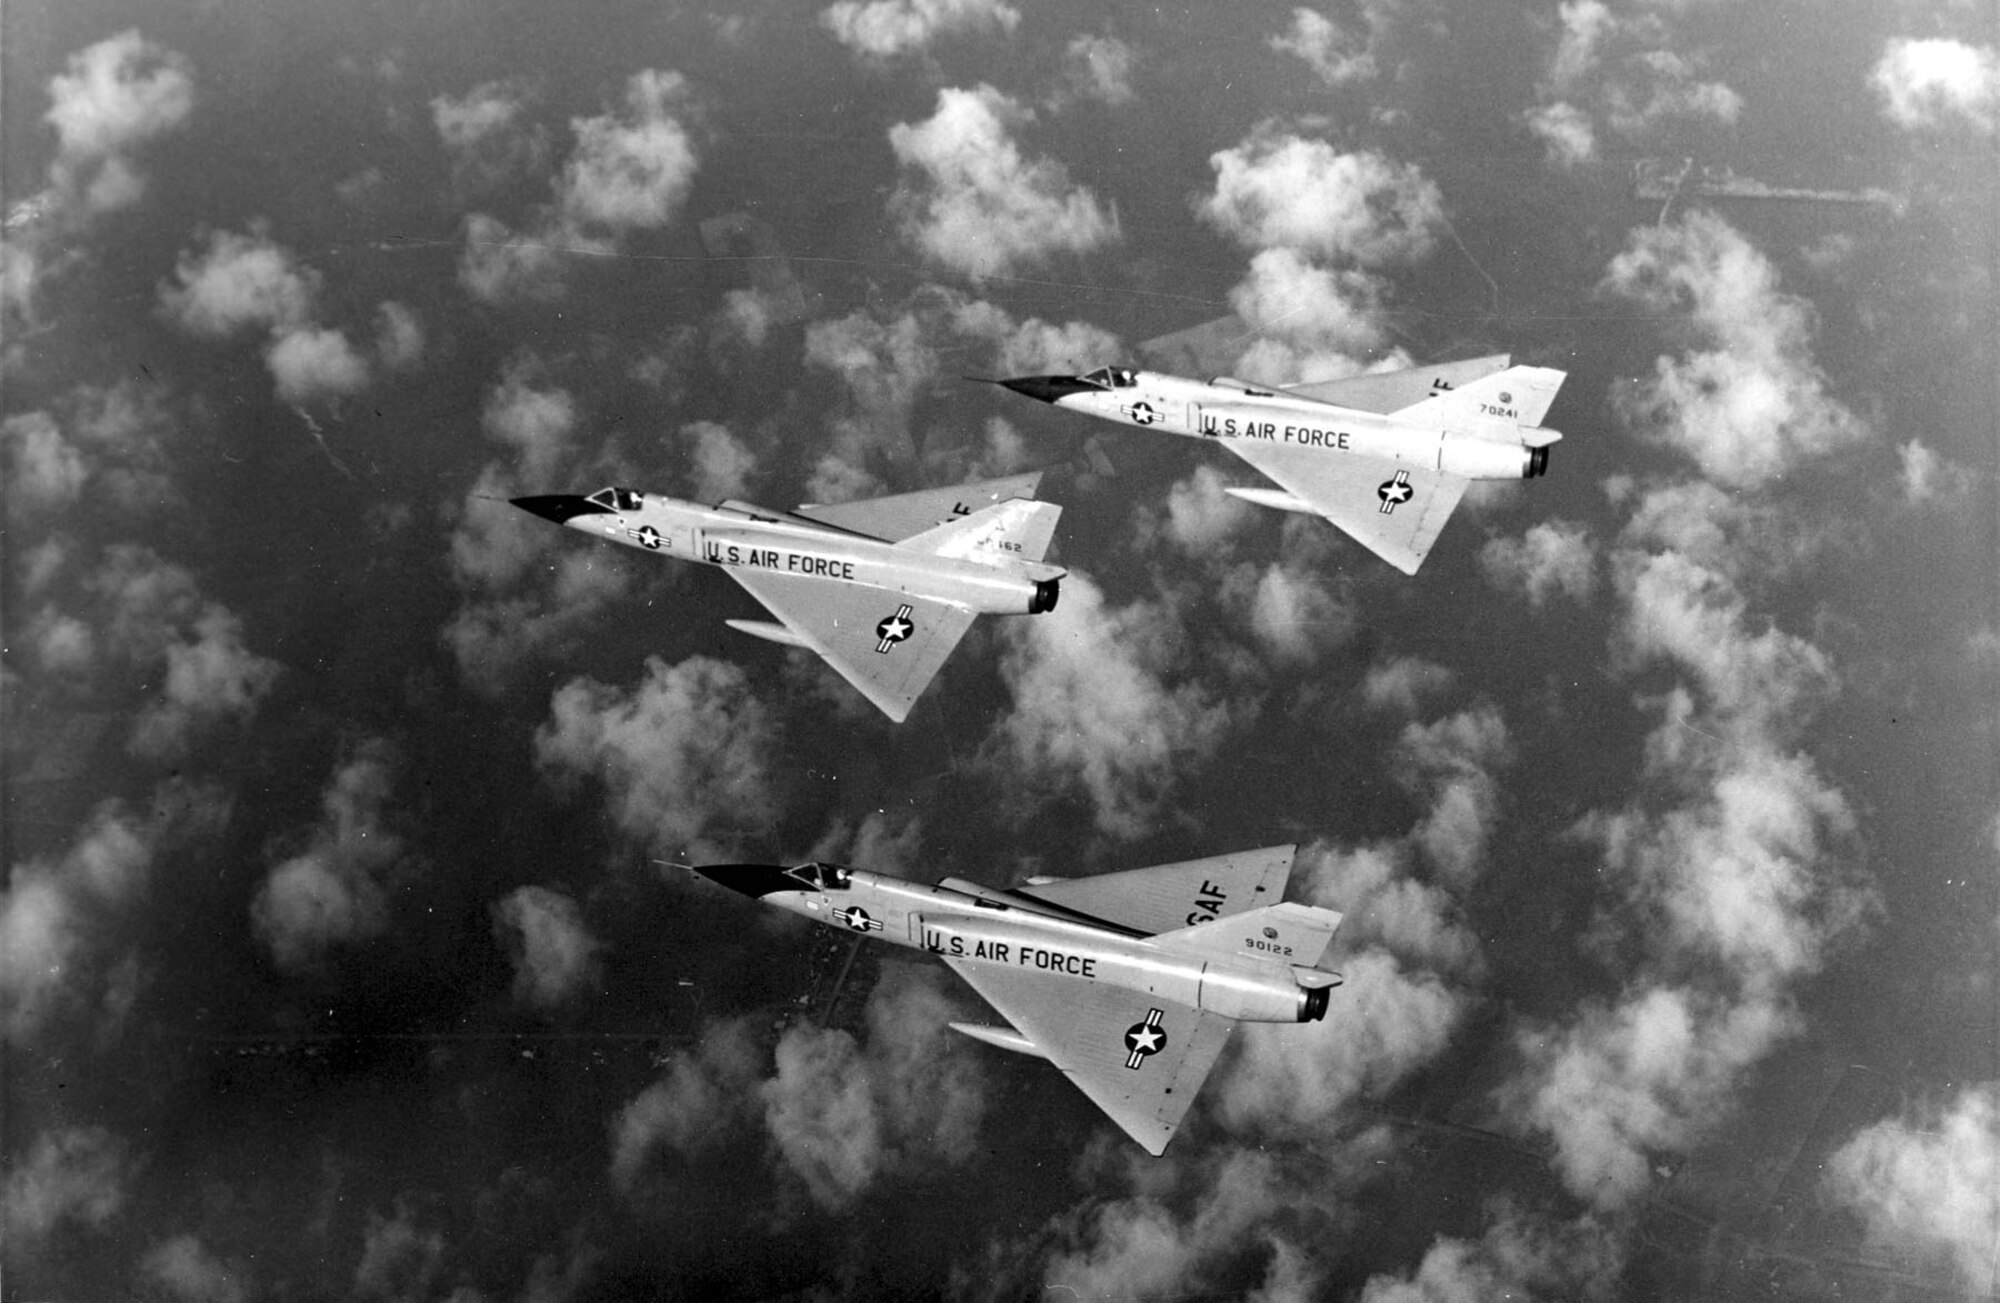 Formation of F-106As. (U.S. Air Force photo)